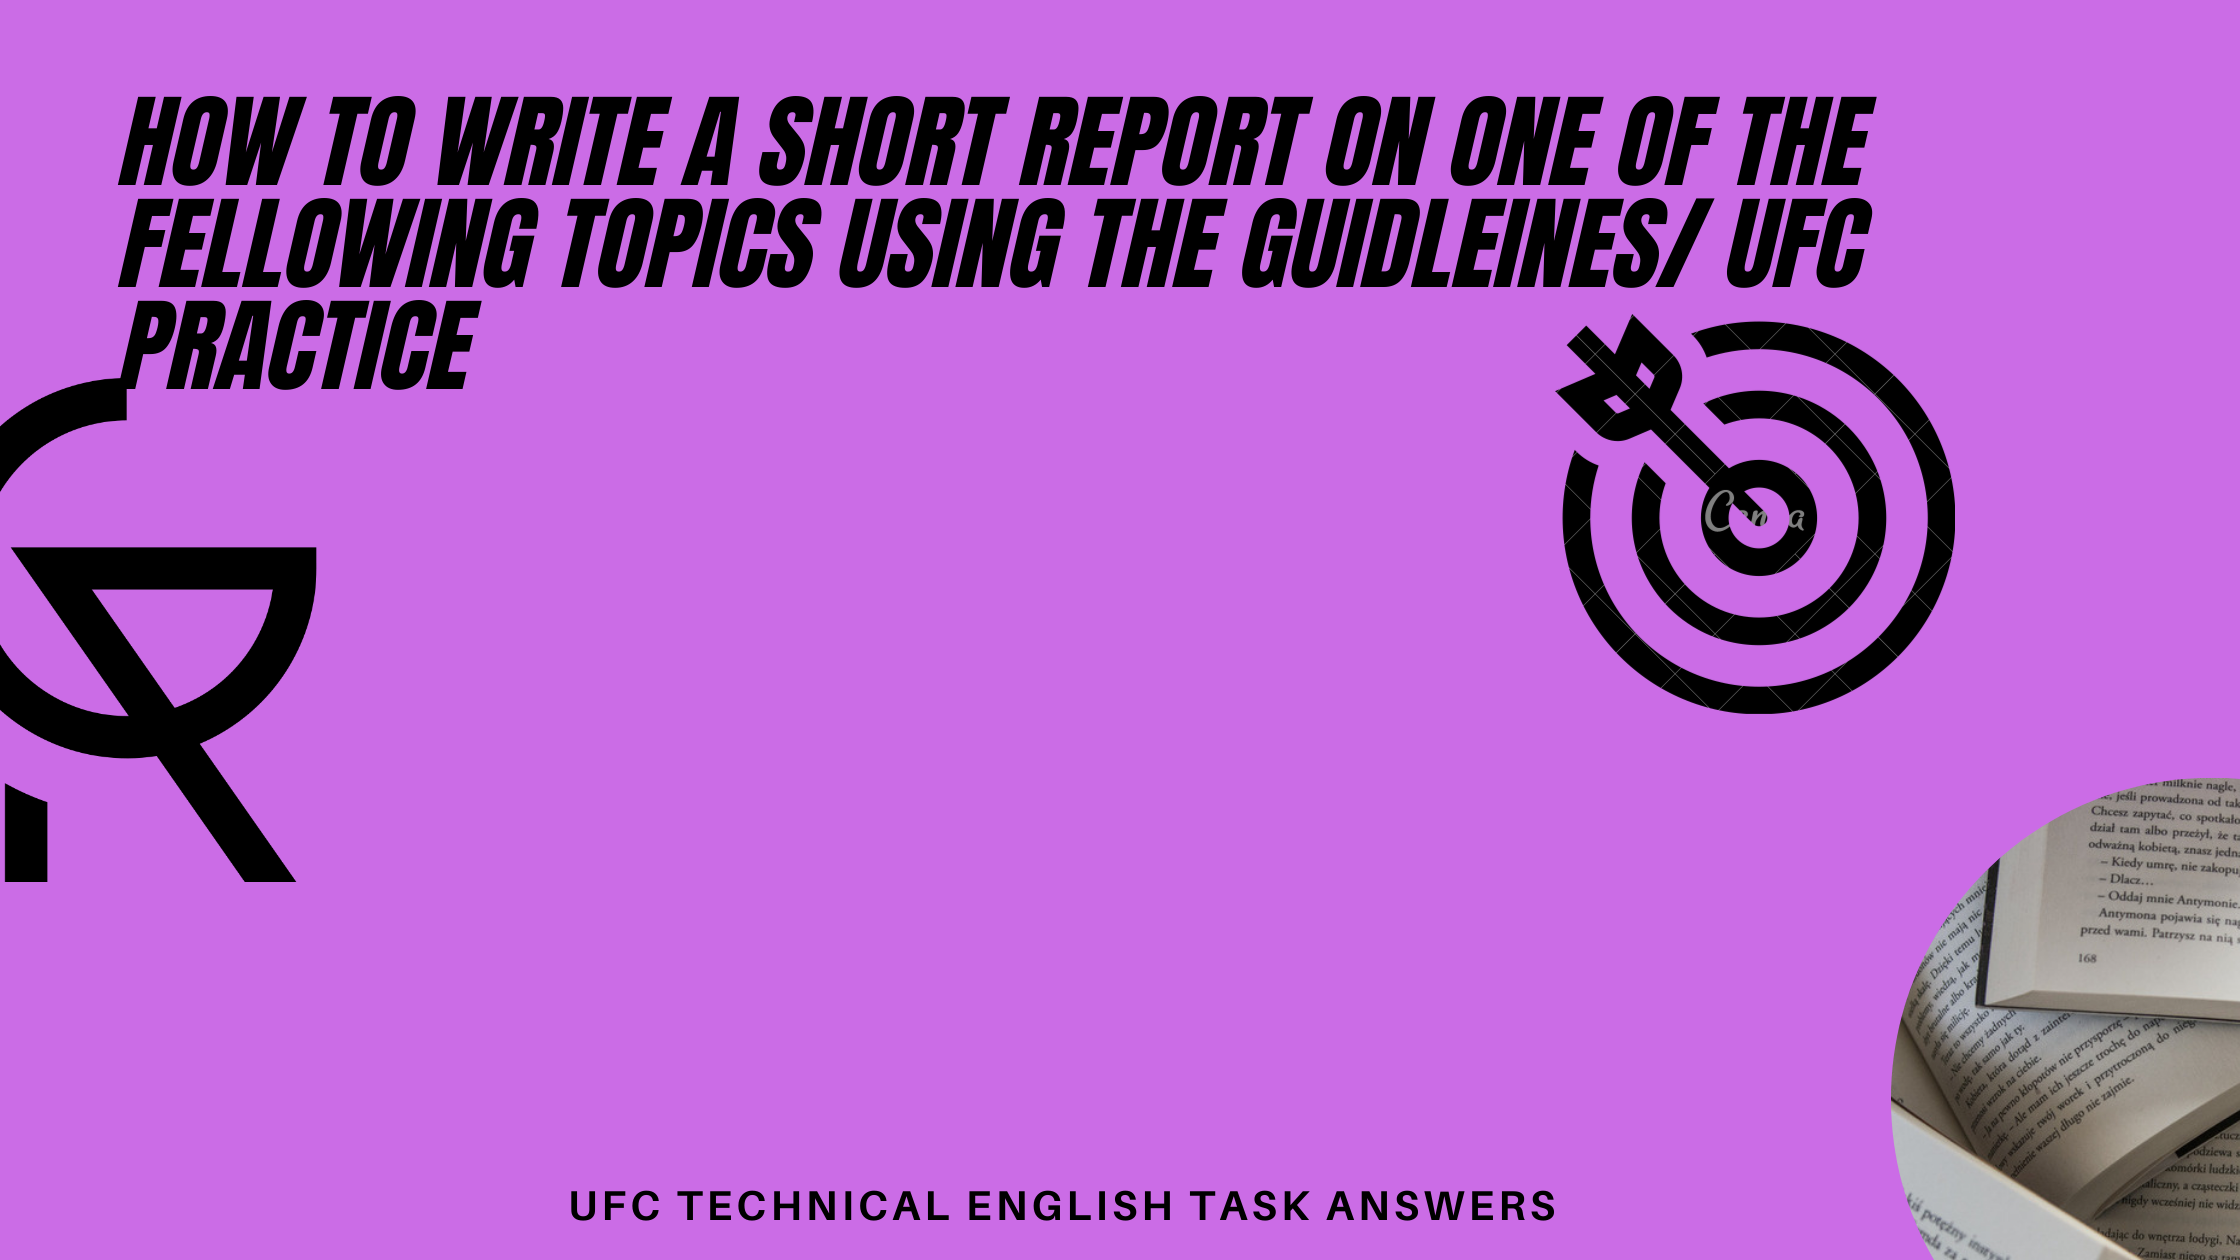 How to write a short report on one of the fellowing topics using the guidleines/ UFC practice